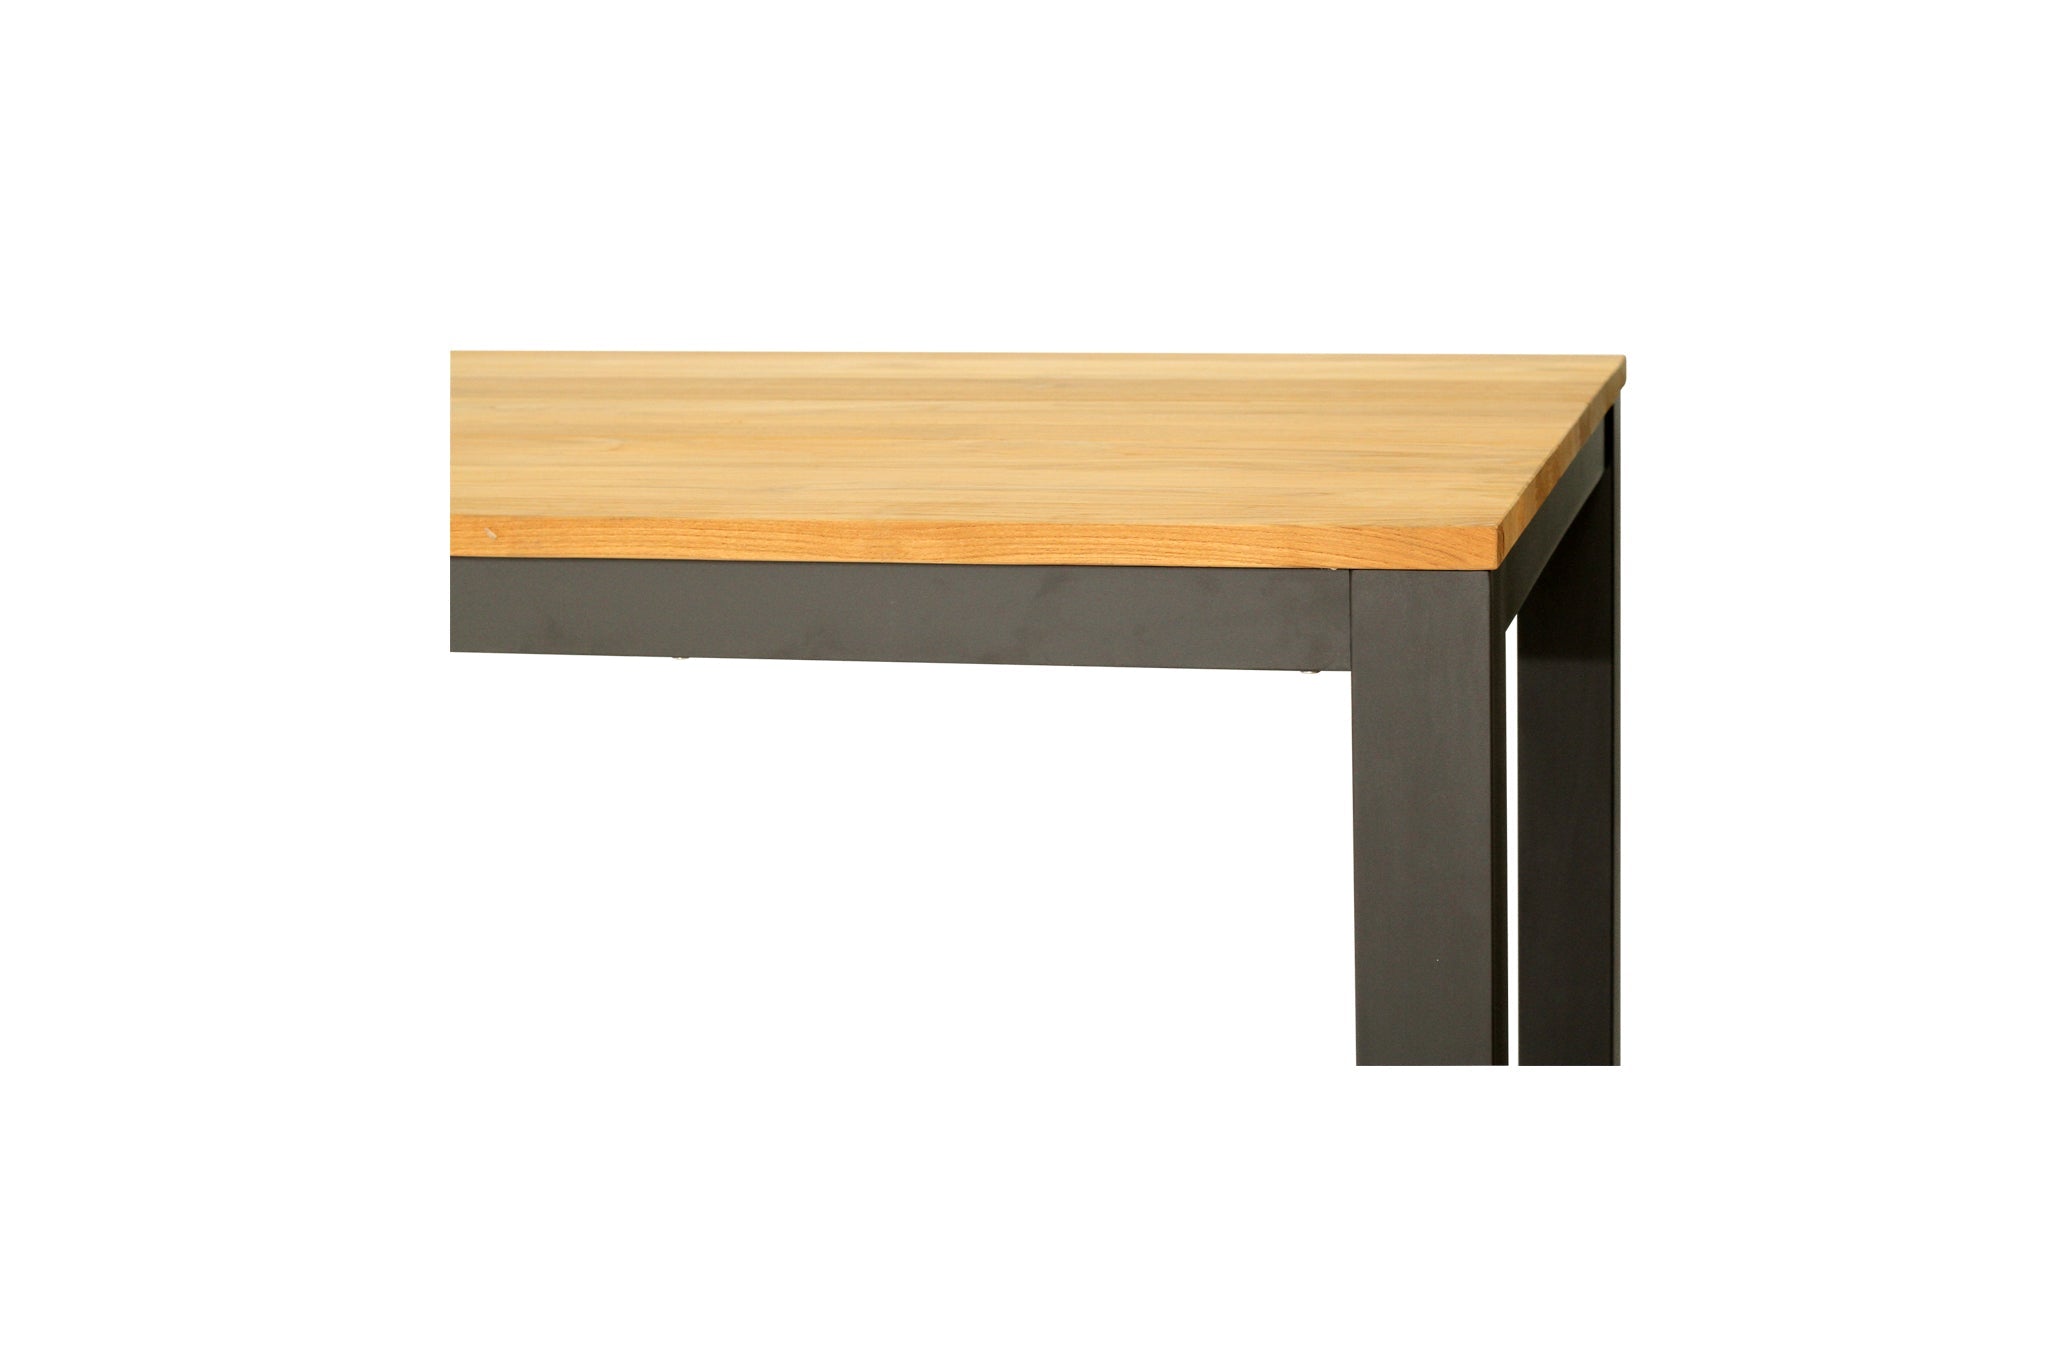 Rose Bay Outdoor Extension Table 2.3m – Asteroid Black (Charcoal) Powder Coated Legs